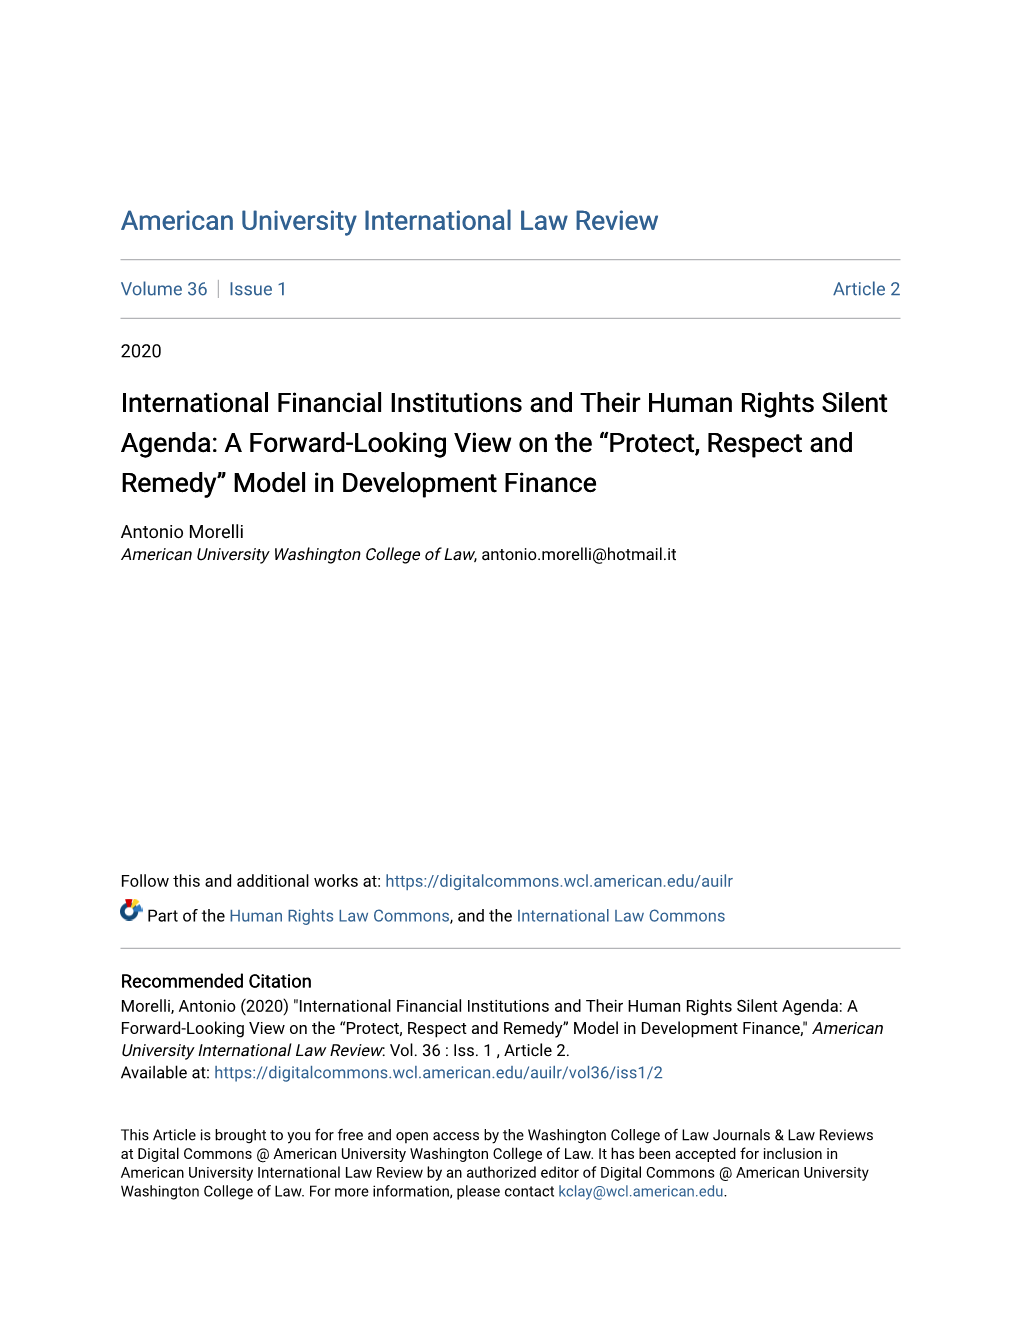 International Financial Institutions and Their Human Rights Silent Agenda: a Forward-Looking View on the “Protect, Respect and Remedy” Model in Development Finance